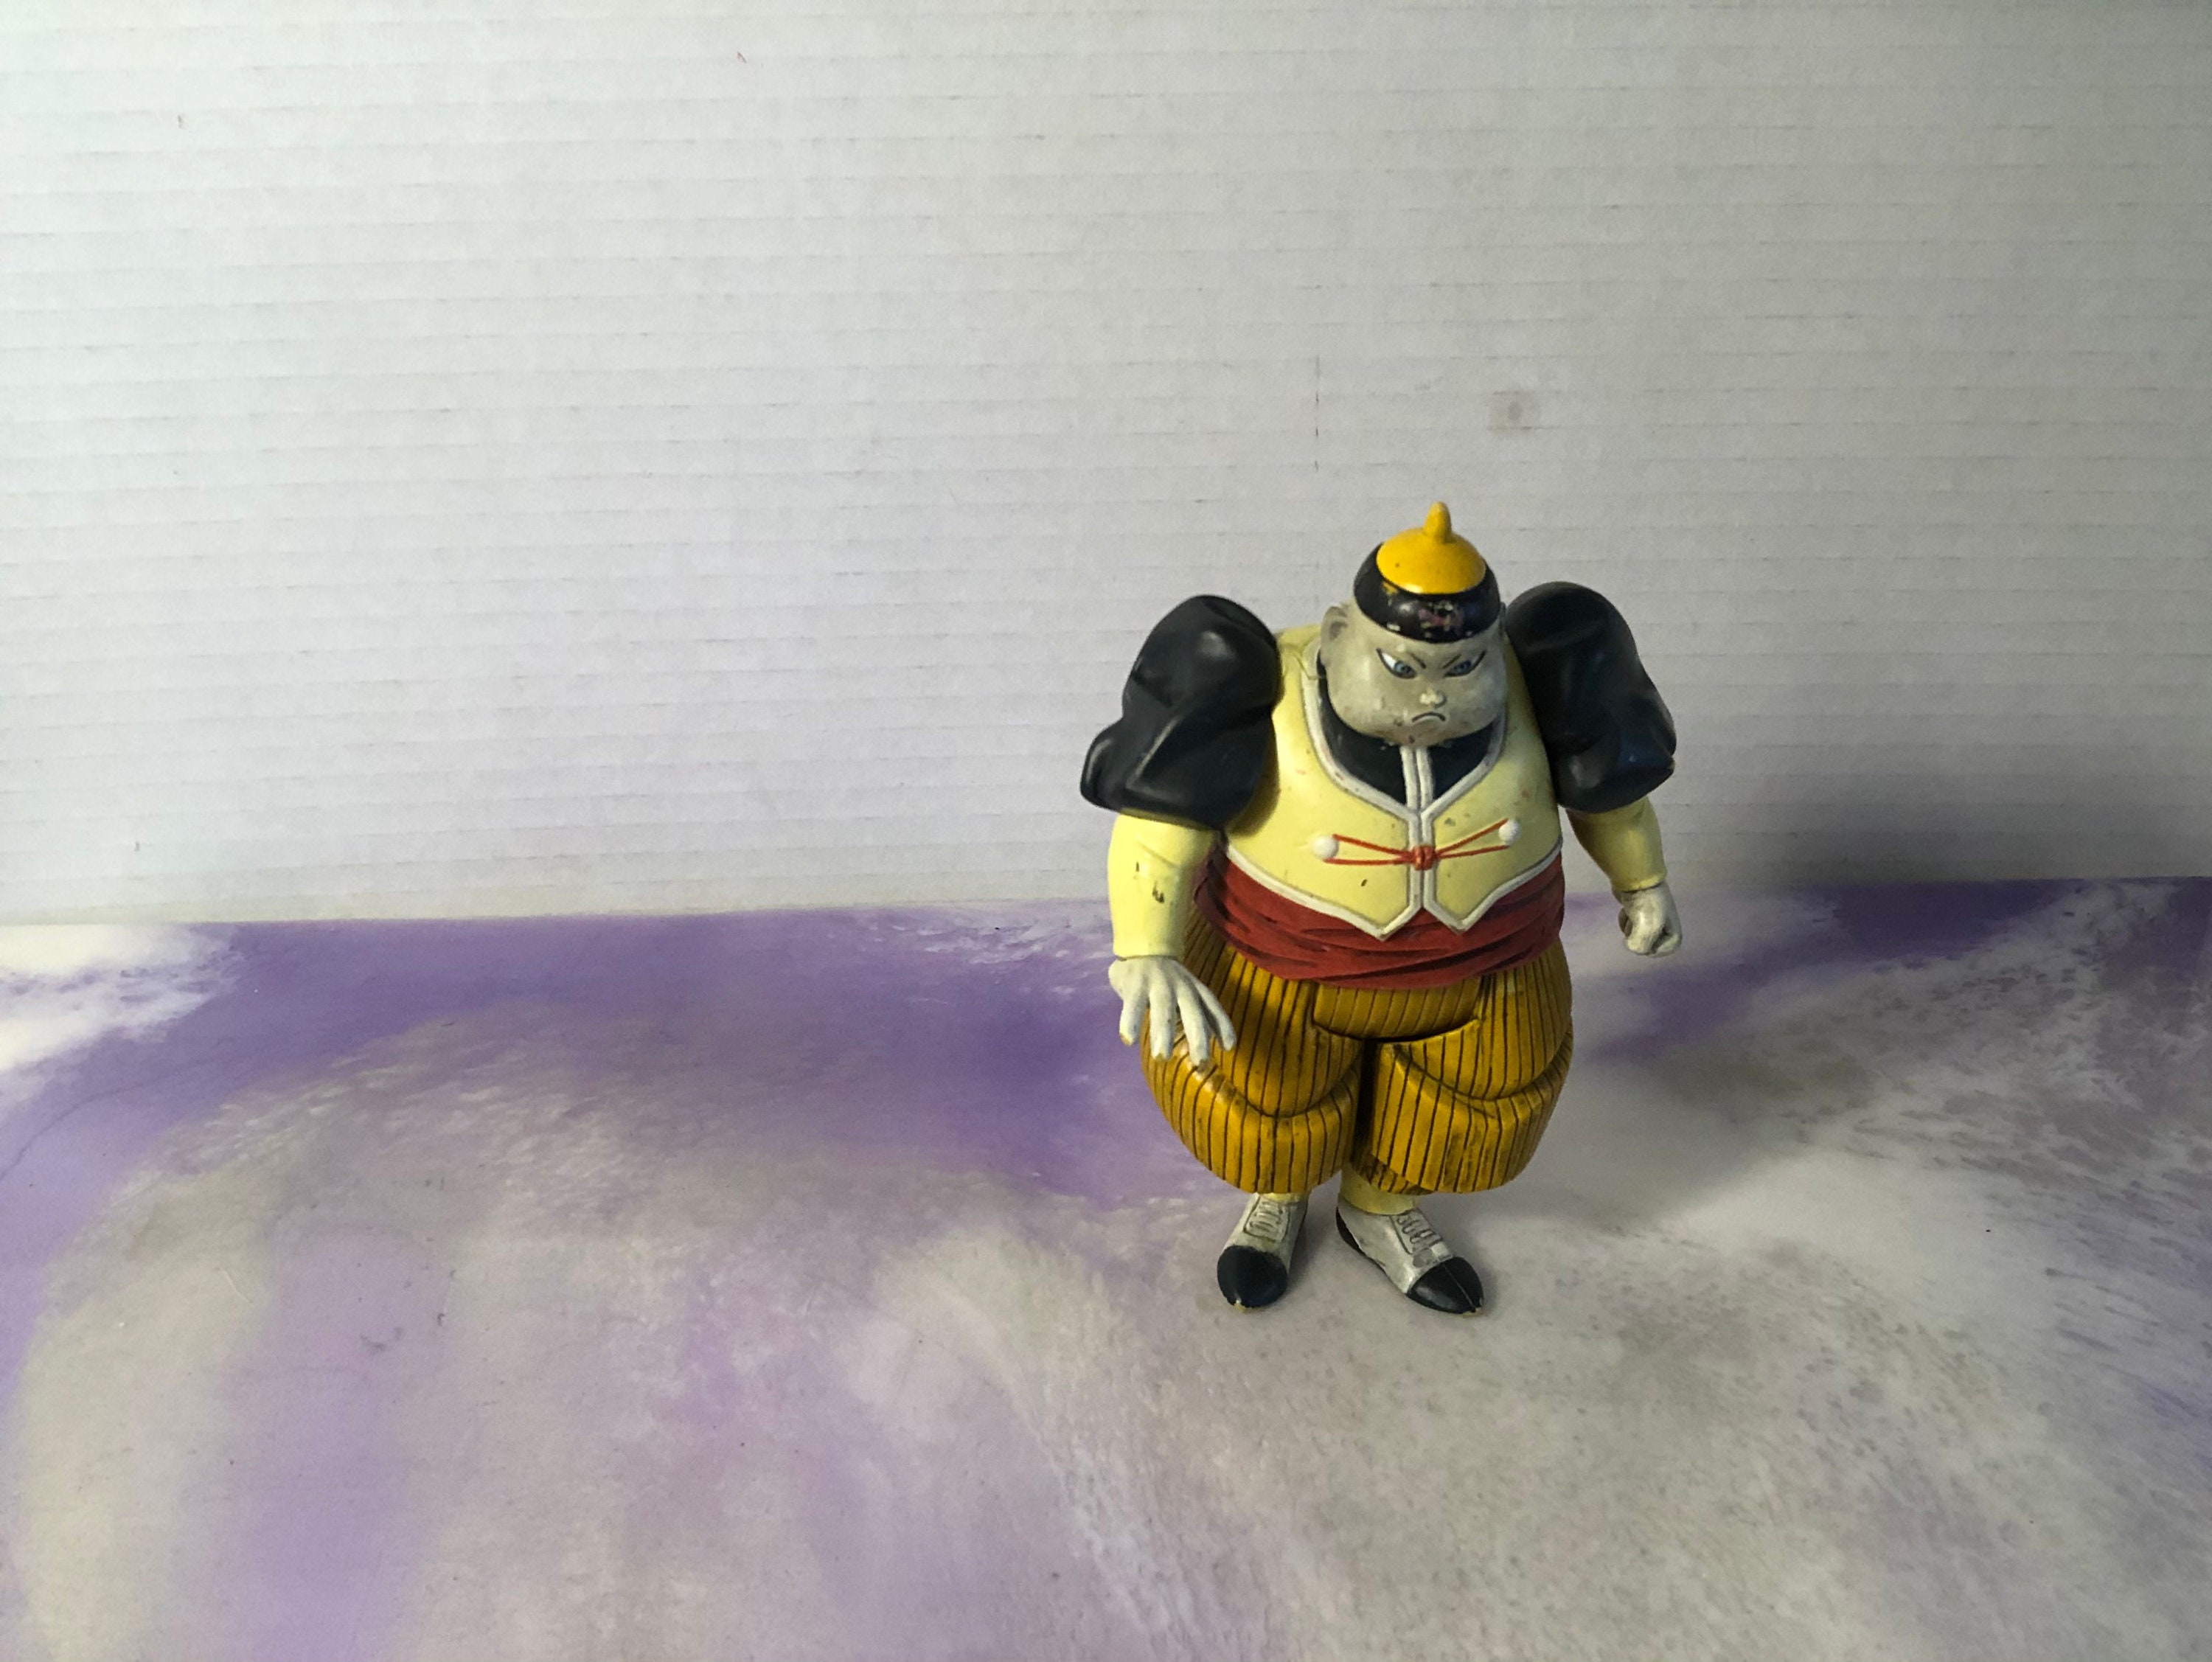 Vintage Dragon Ball Z SS Android 19 Action Figure Rare -  Norway